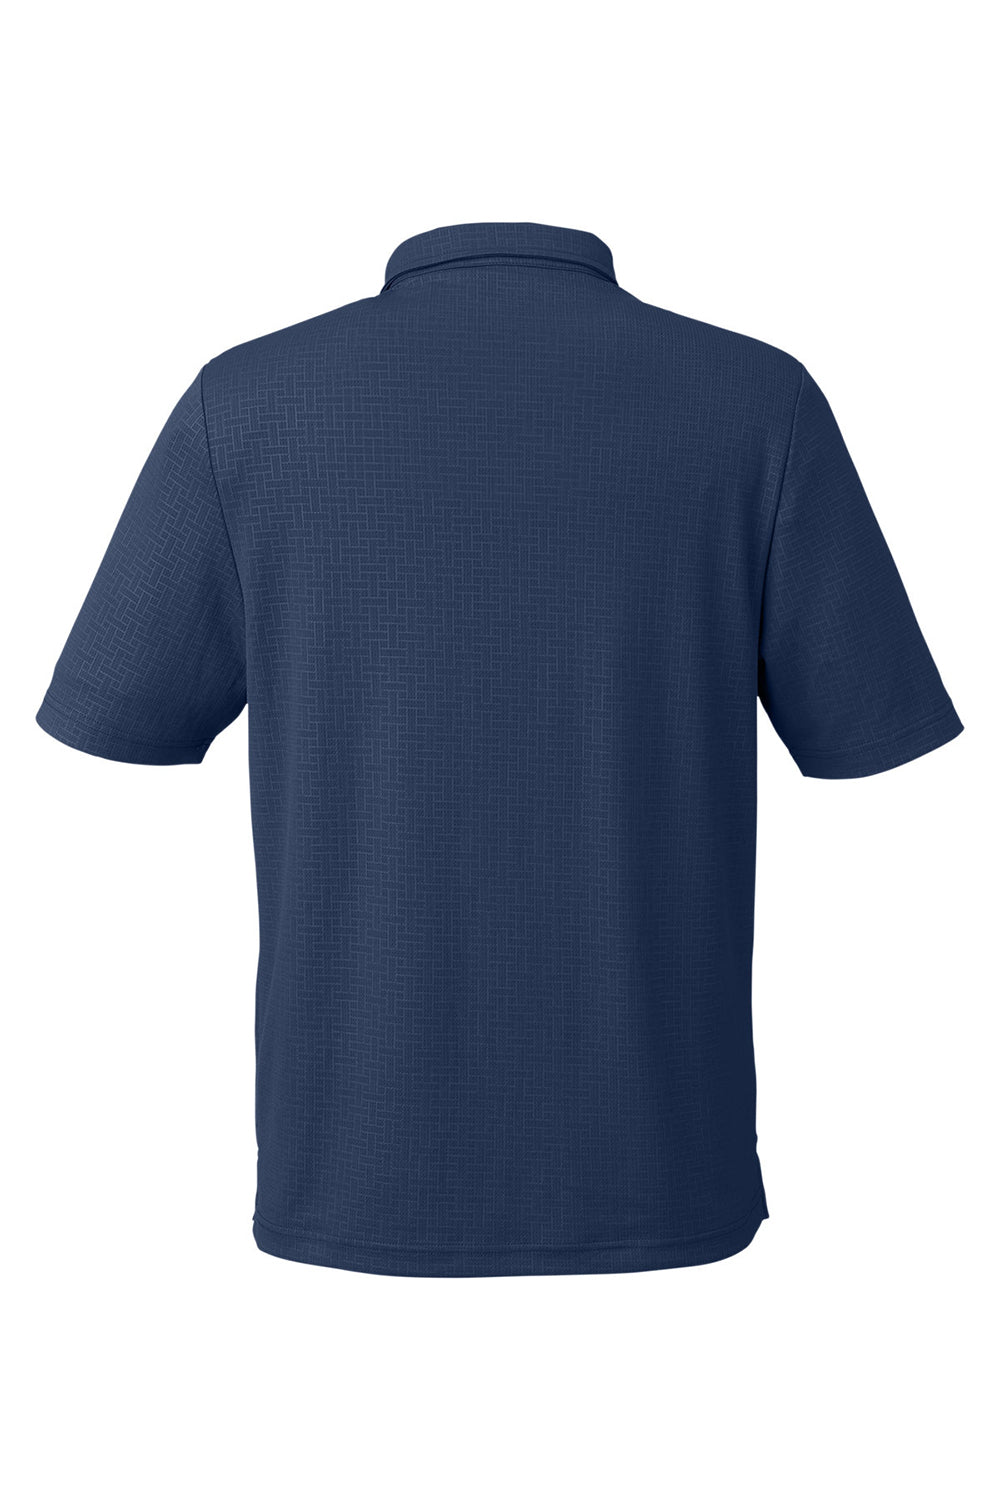 North End NE102 Mens Replay Recycled Short Sleeve Polo Shirt Classic Navy Blue Flat Back